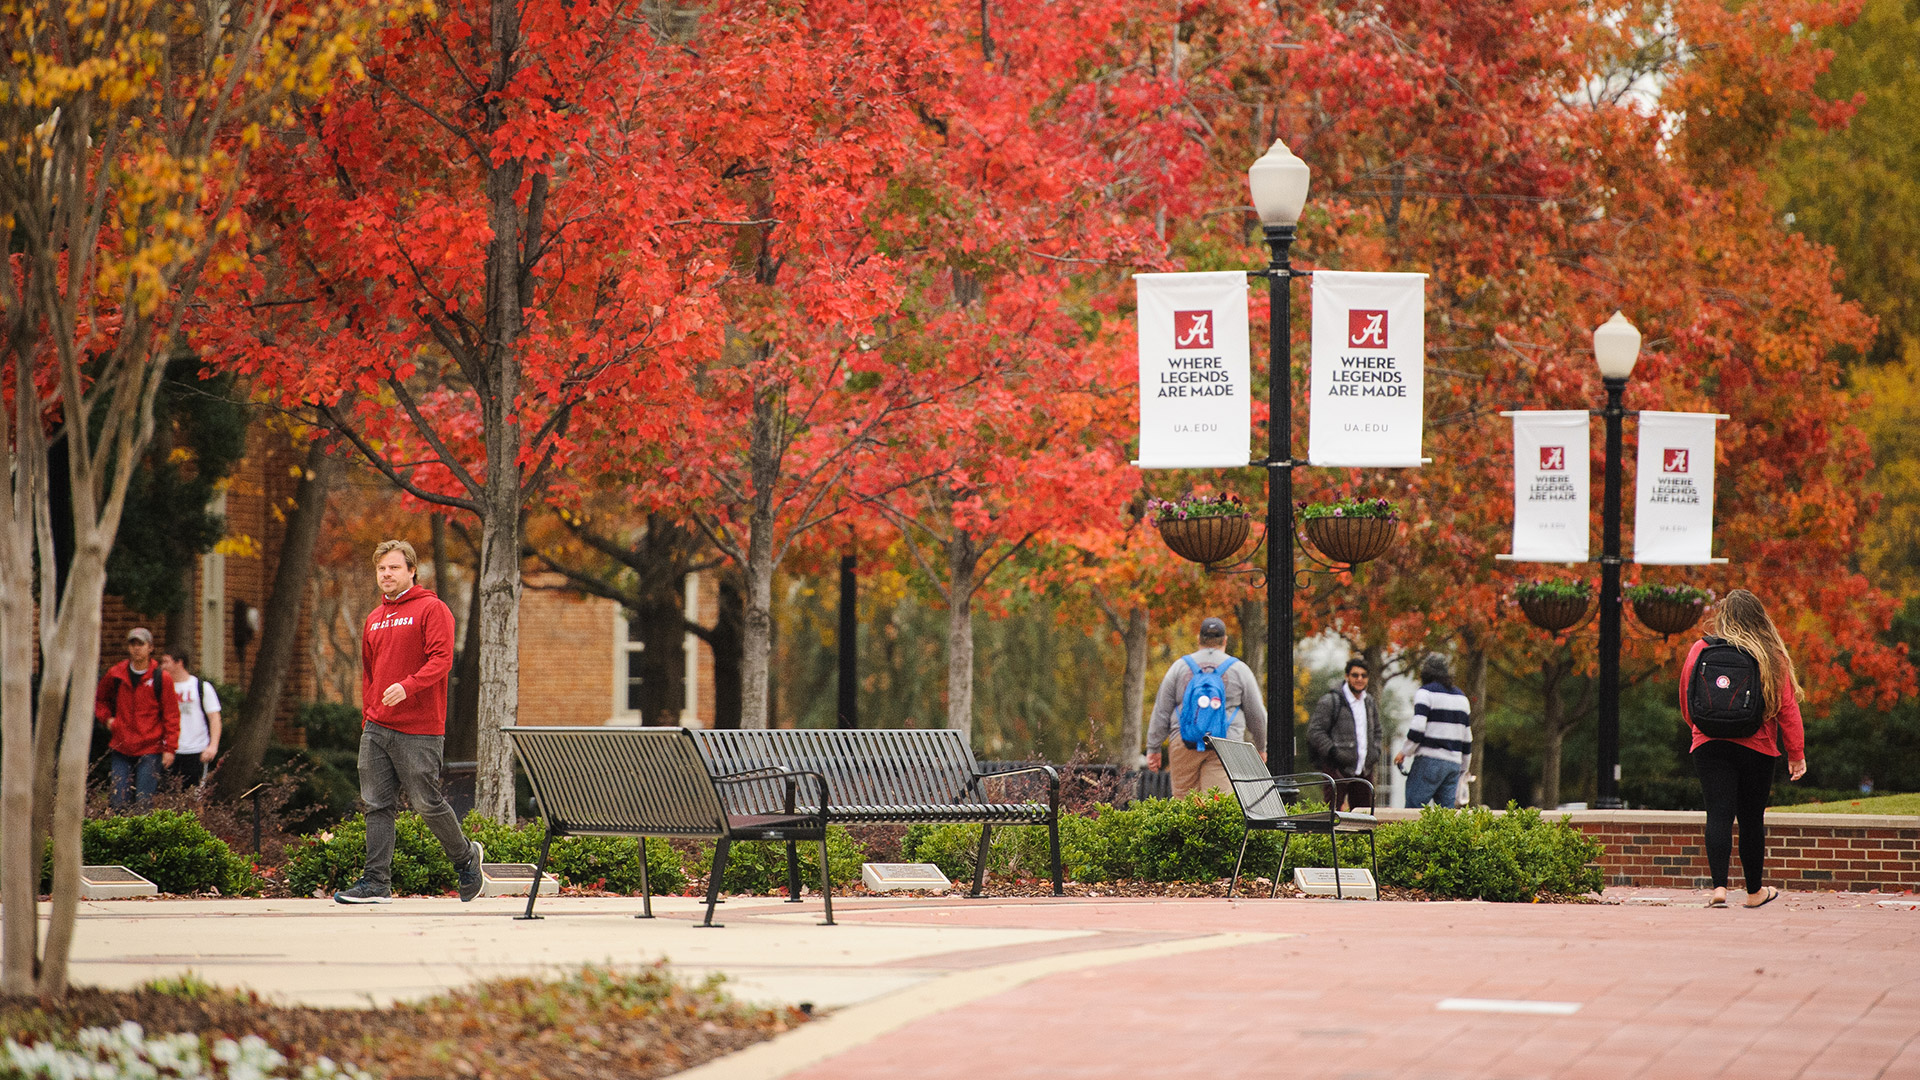 Story Image - Students walking on campus in the fall